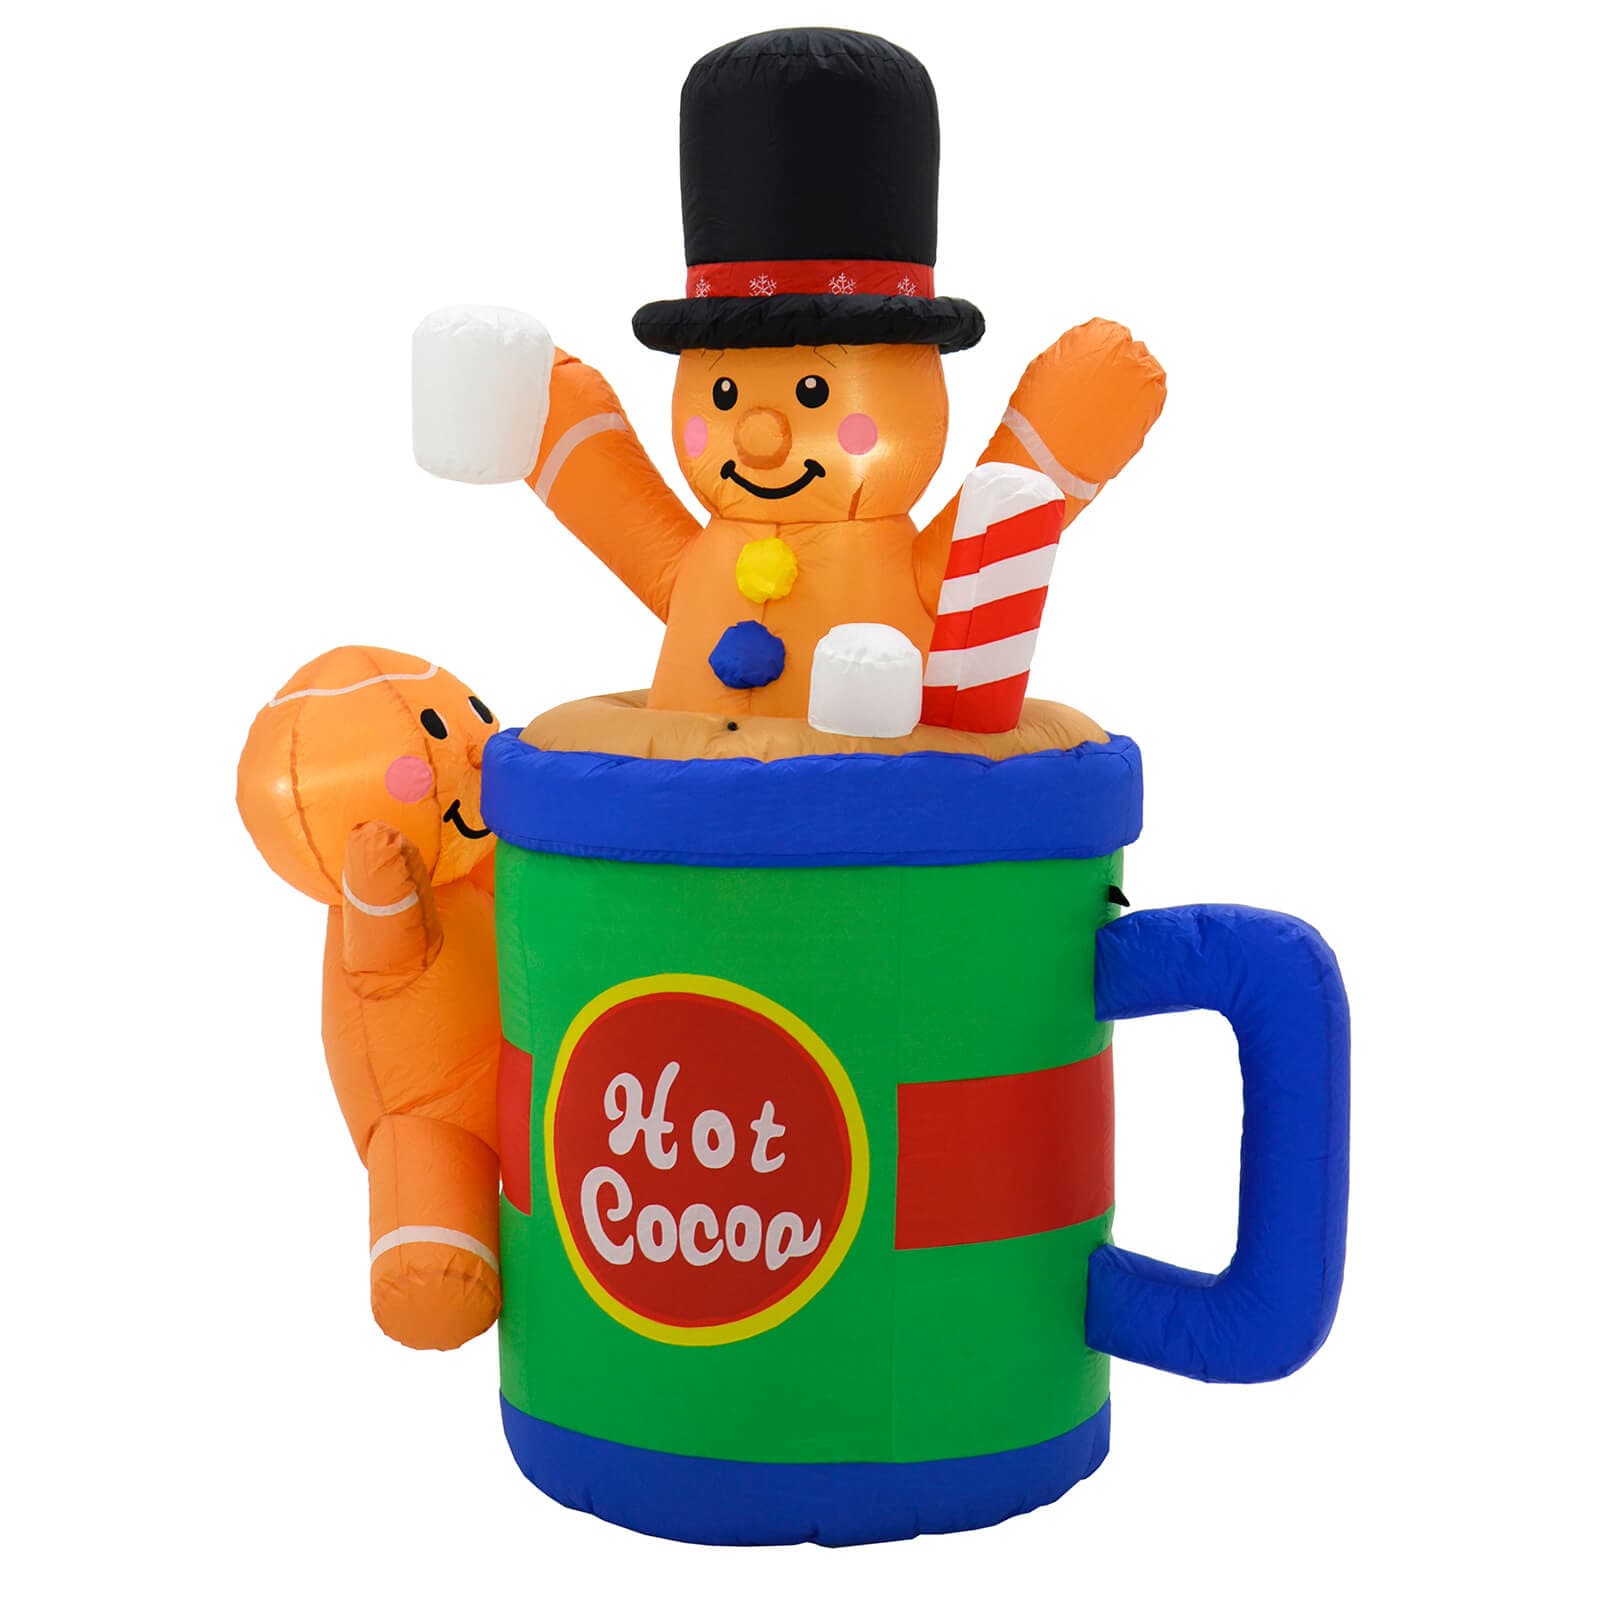 Large inflatable Christmas decoration gingerbread man in hot cocoa cup with marshmallows and candy stick